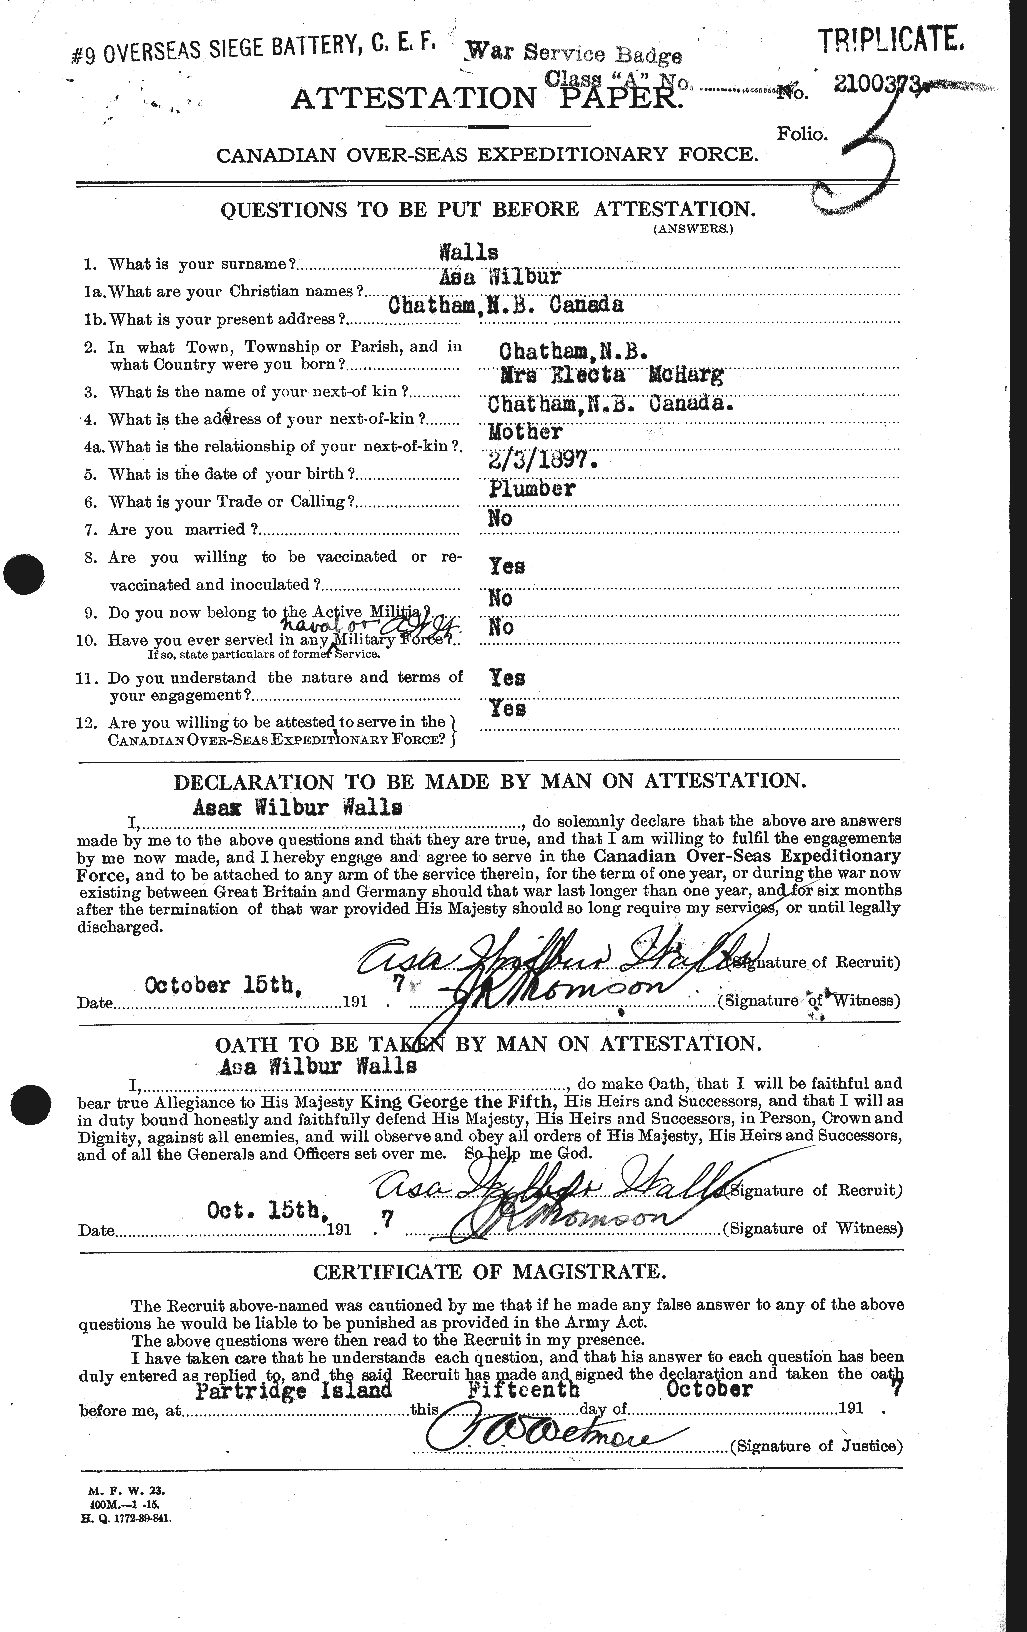 Personnel Records of the First World War - CEF 667030a